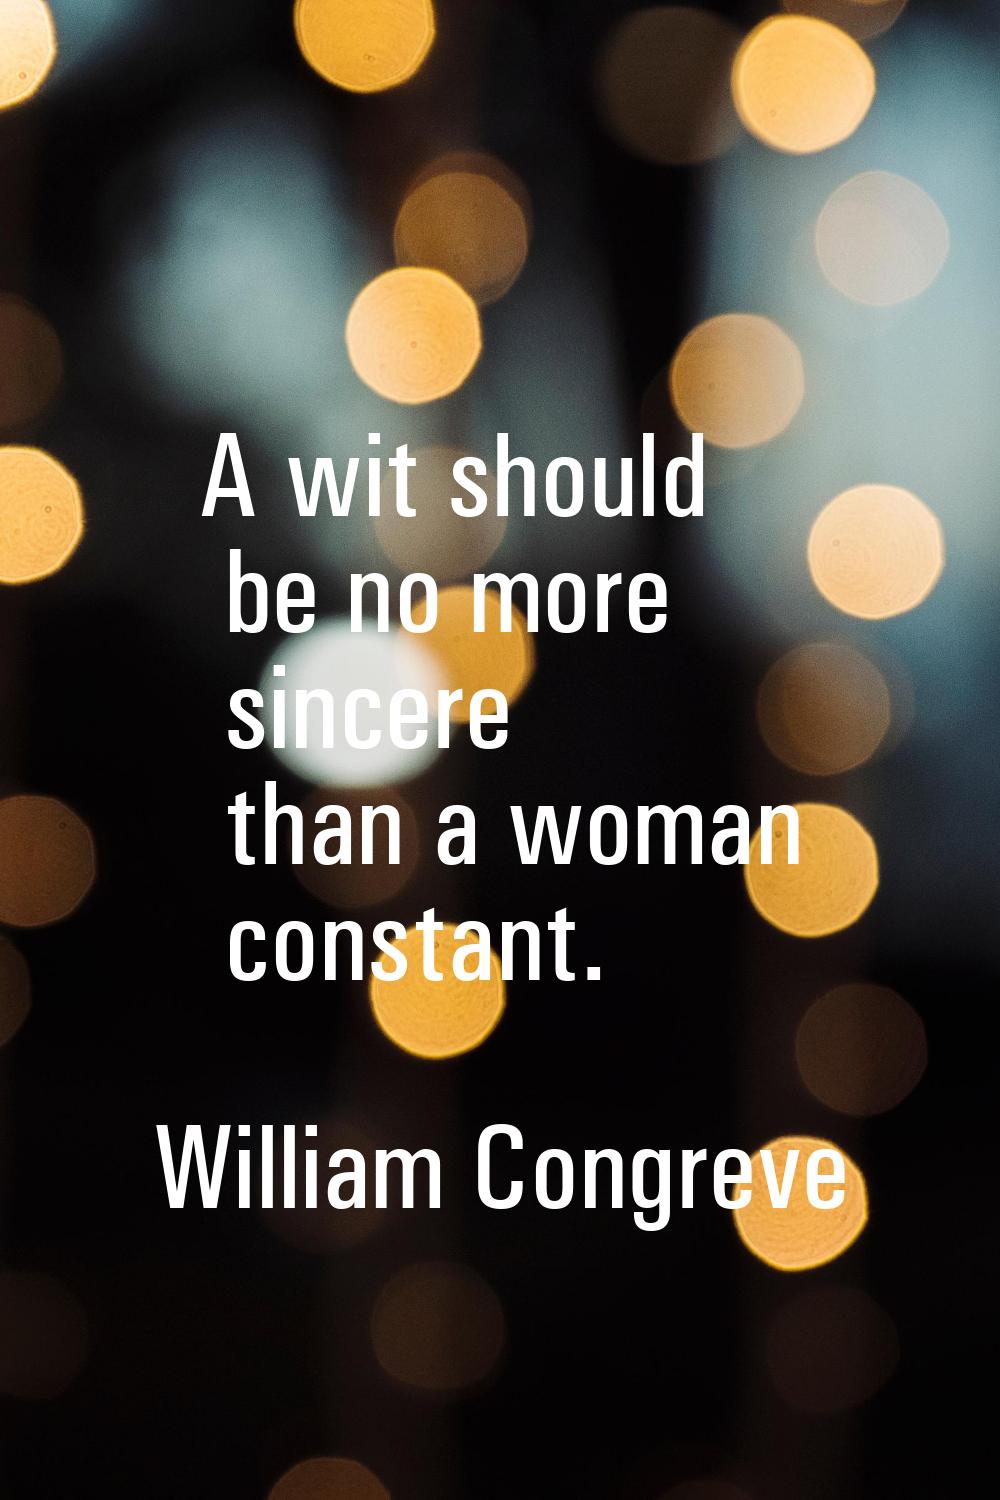 A wit should be no more sincere than a woman constant.